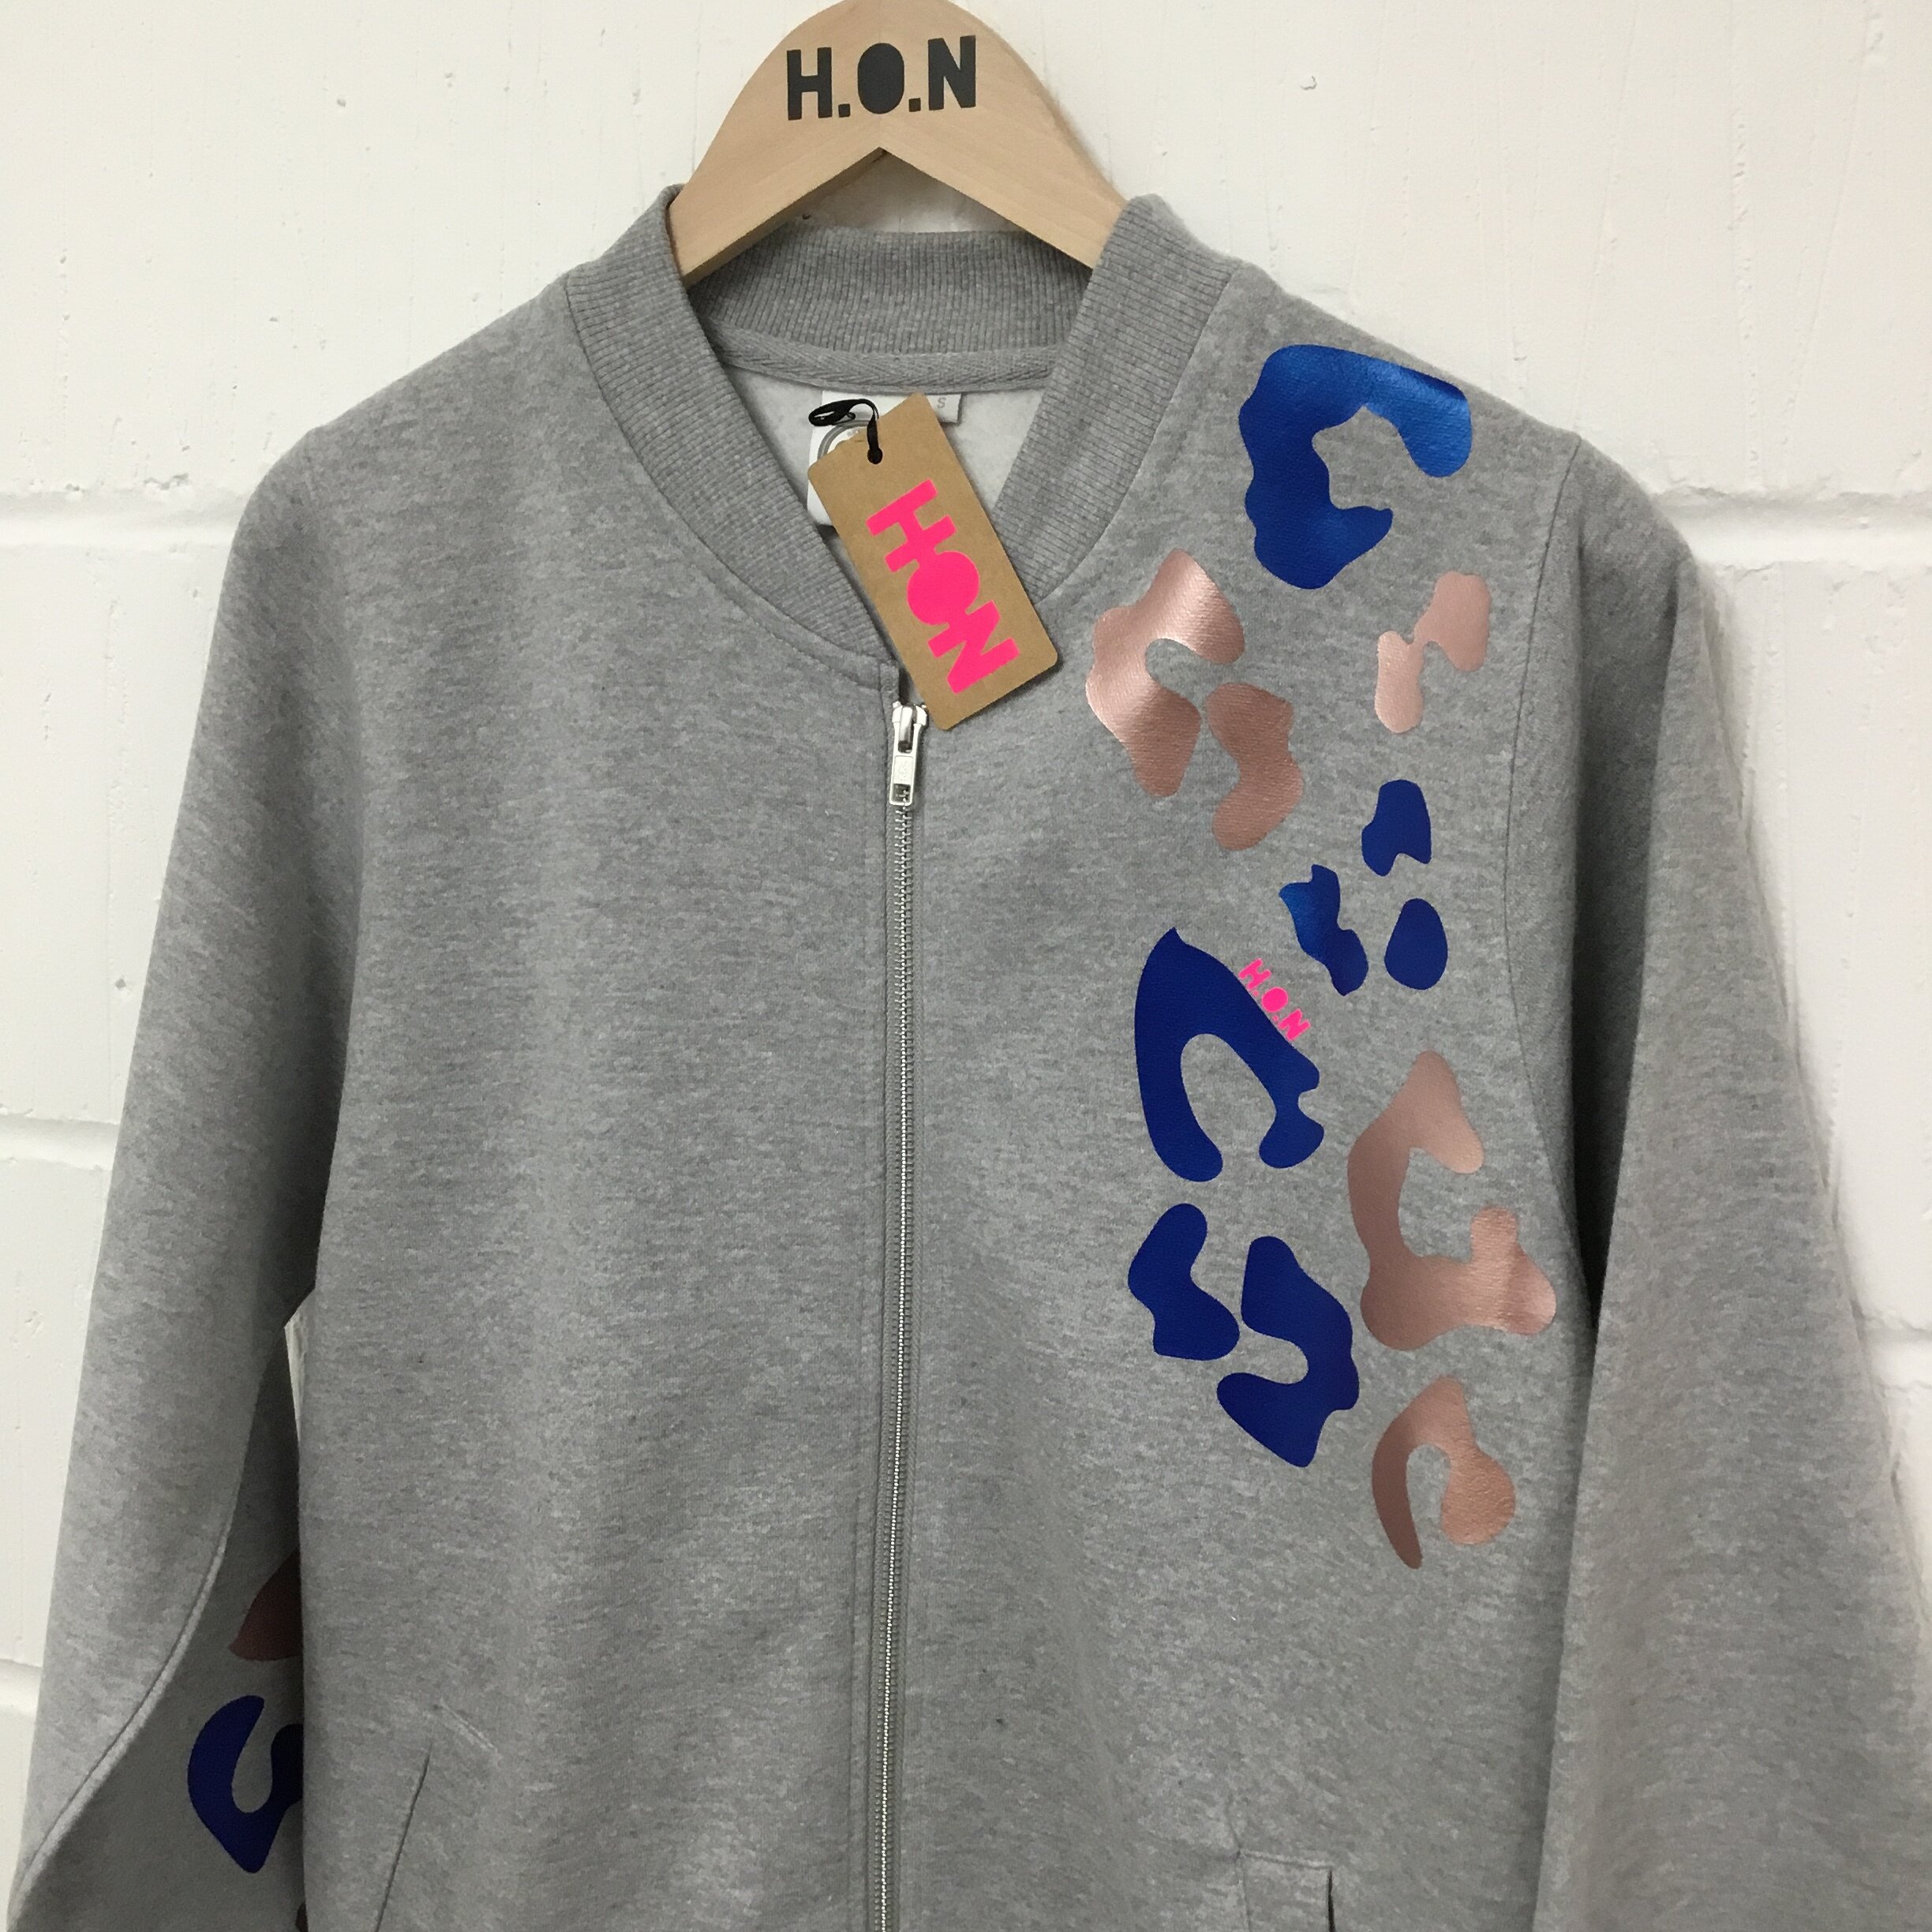 BOMBER AND DENIM JACKETS — HOUSE OF NEON